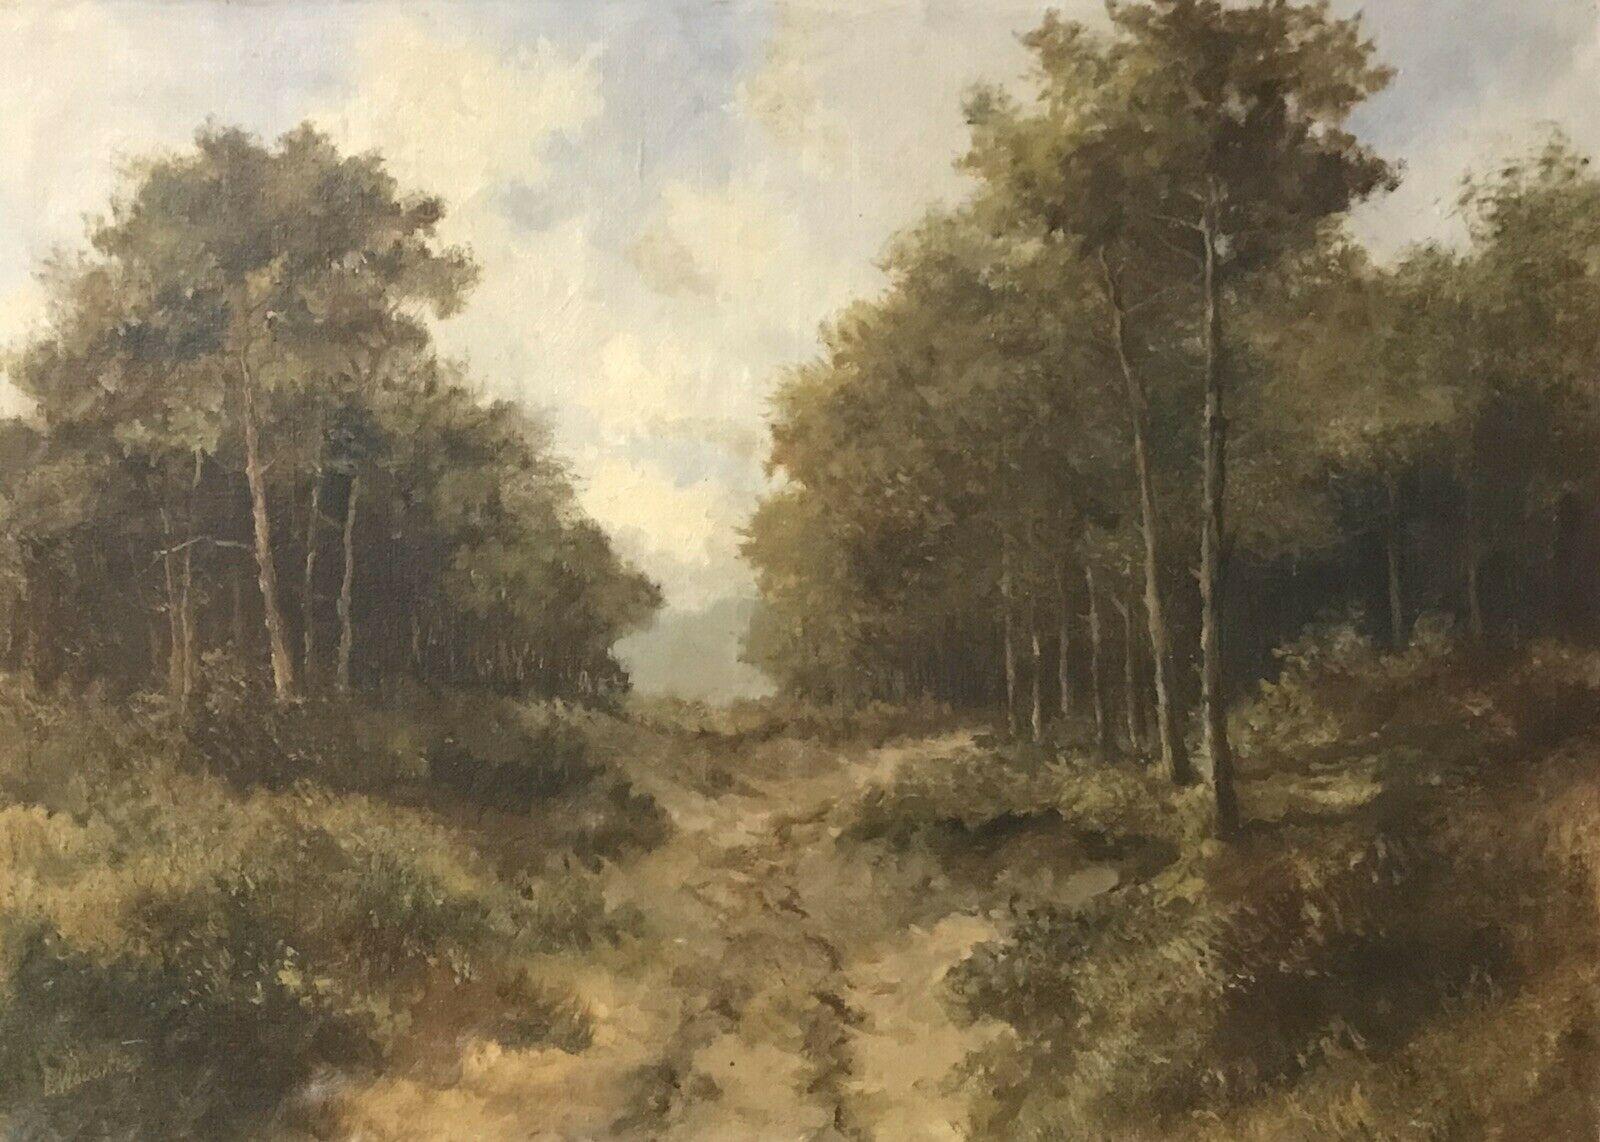 Unknown Figurative Painting - ANTIQUE BRITISH OIL PAINTING - RURAL COUNTRY LANE LANDSCAPE - SIGNED